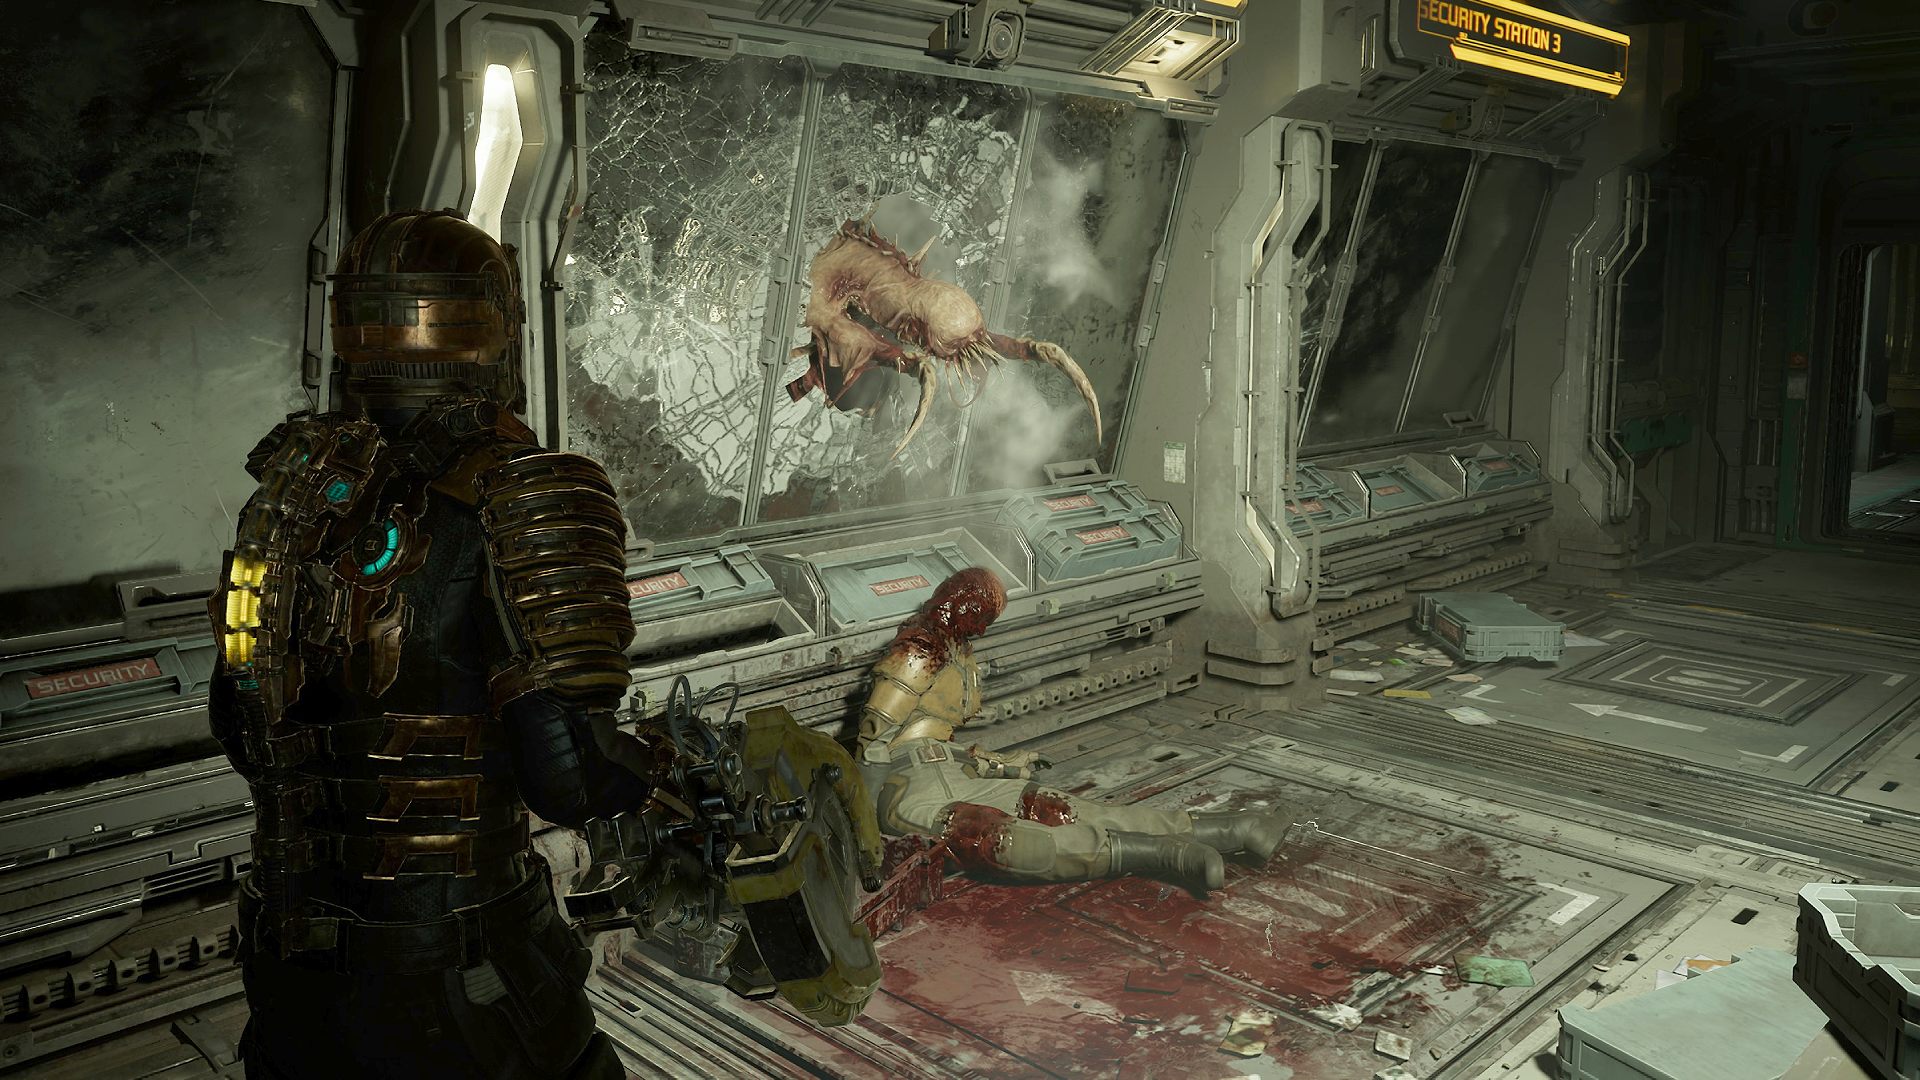 Dead Space Remake review: Isaac Clarke stands in front of a body as a necromorph breaks a window